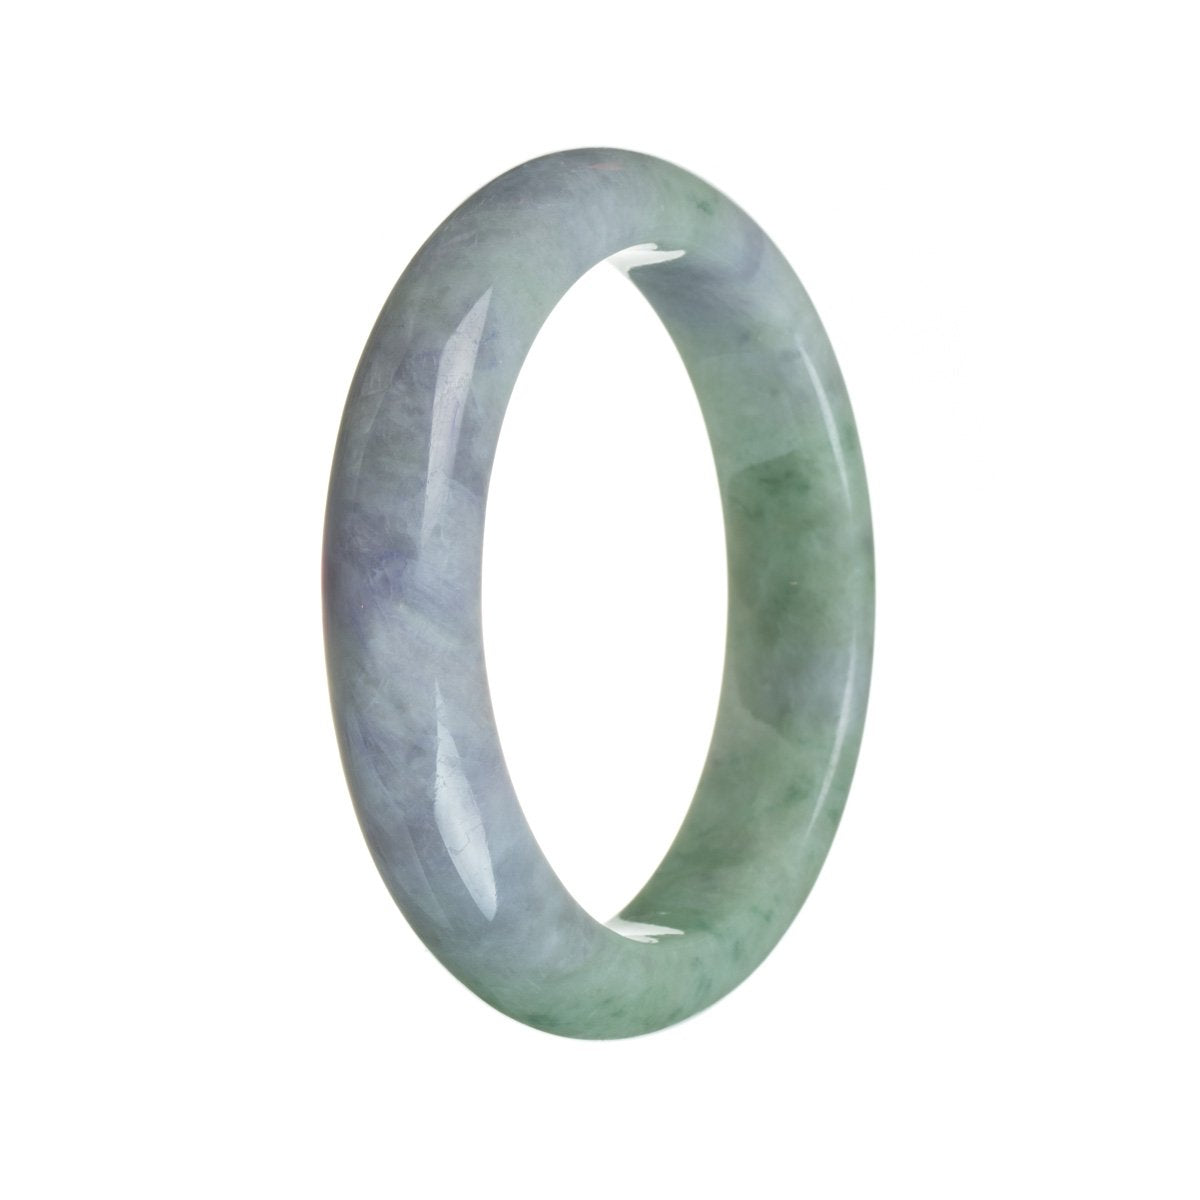 A beautiful half moon-shaped jade bangle in a vibrant green color with hints of lavender. The bangle has a strong and sturdy design, perfect for adding a touch of elegance to any outfit.